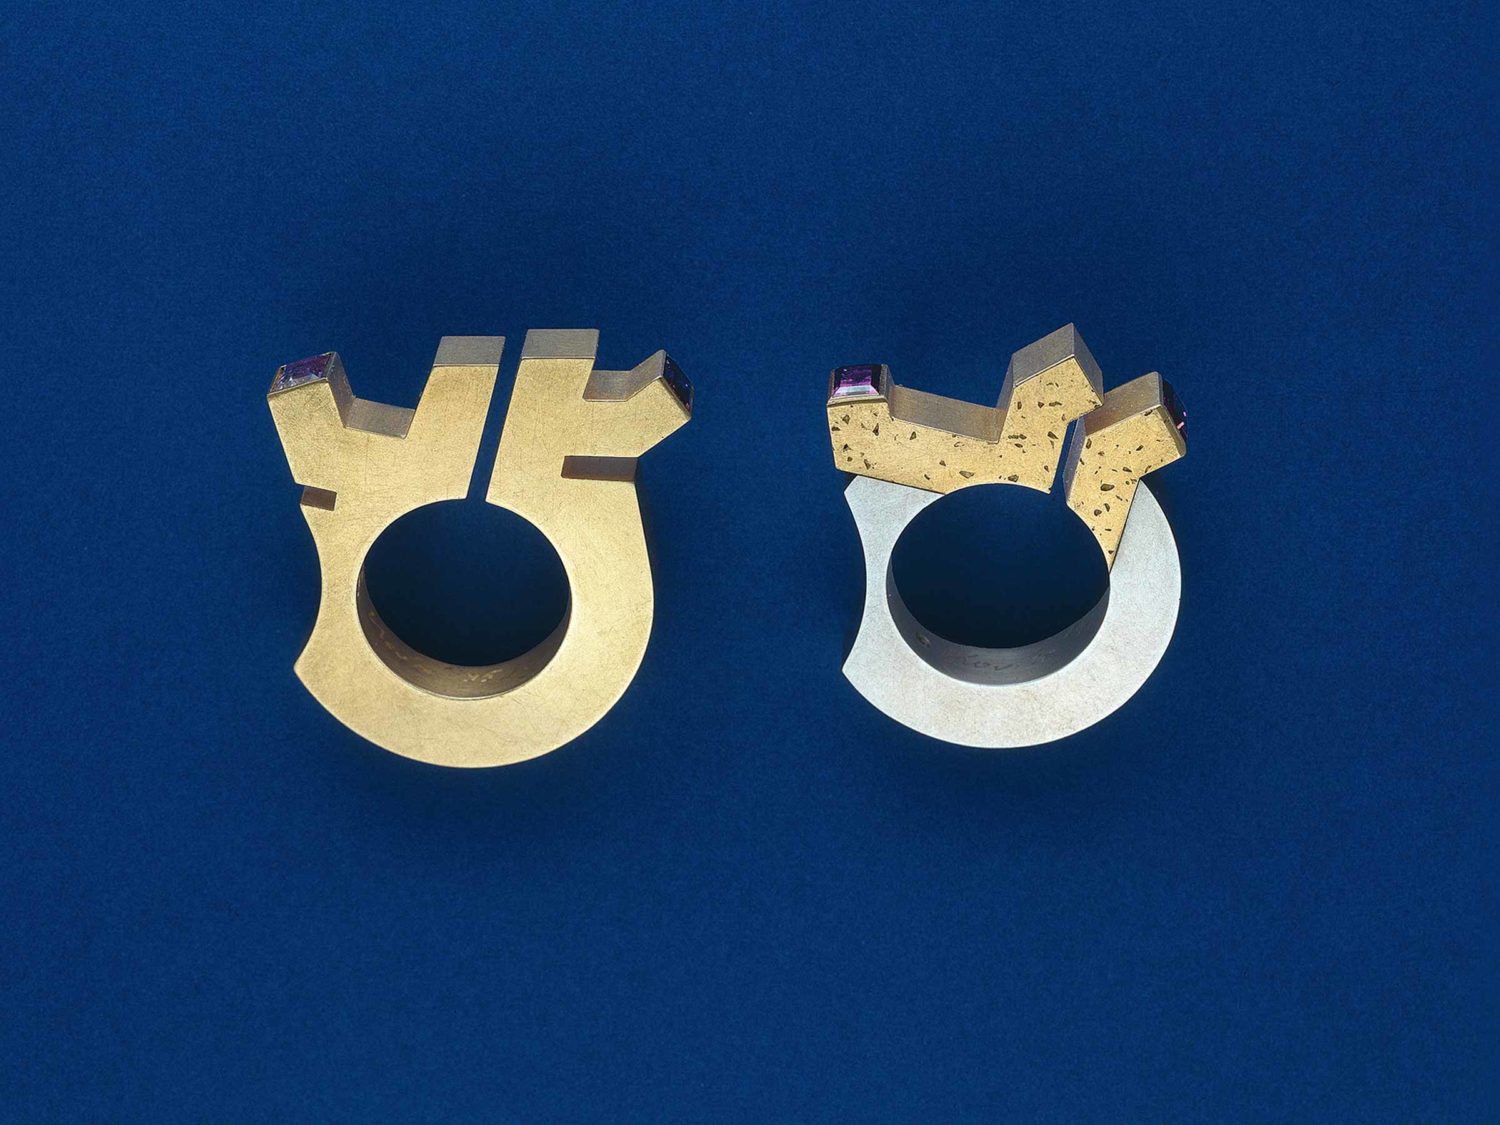 TWO RINGS, 1995, LEFT: GOLD, RUBIES, RIGHT: GOLD, WHITE GOLD, RUBIES